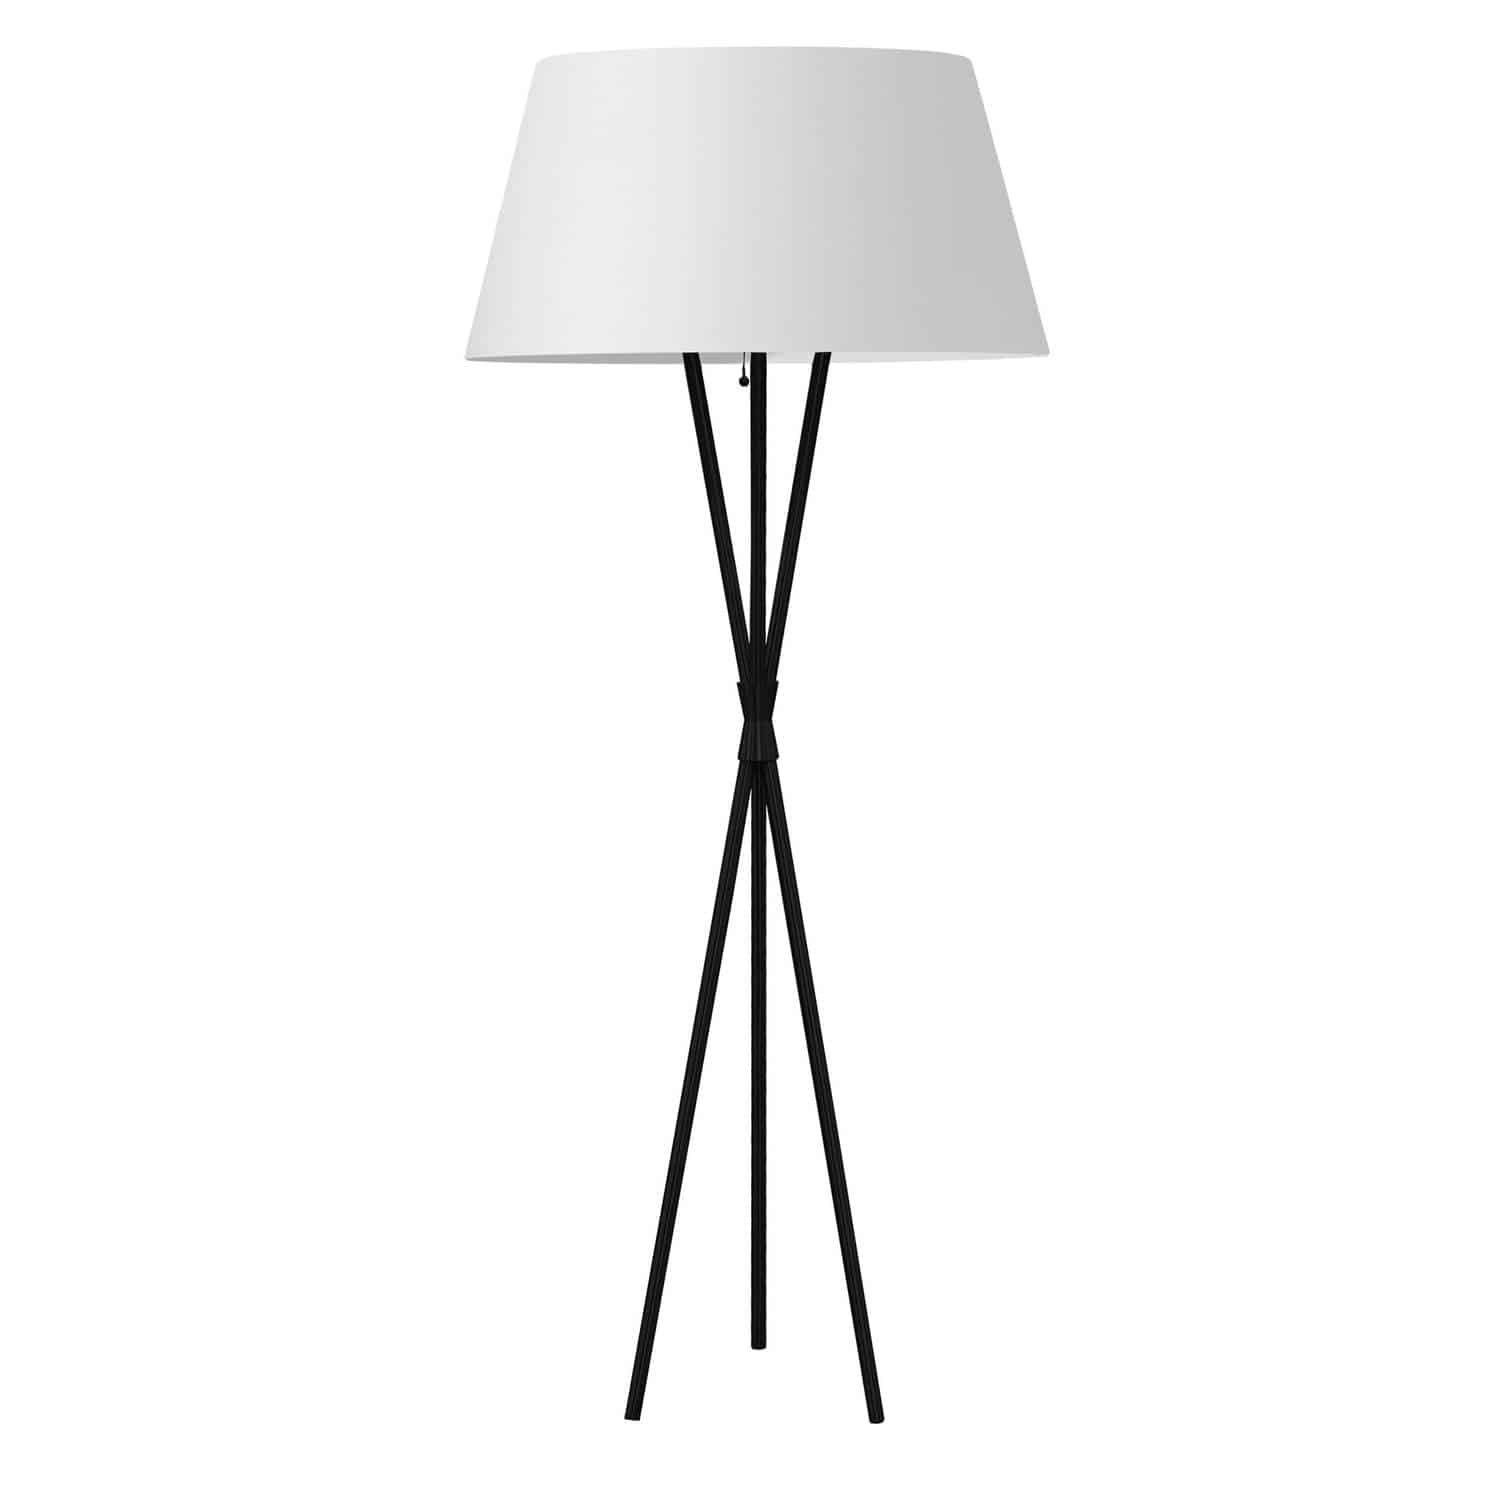 1LT Floor Lamp, MB w/ WH Shade